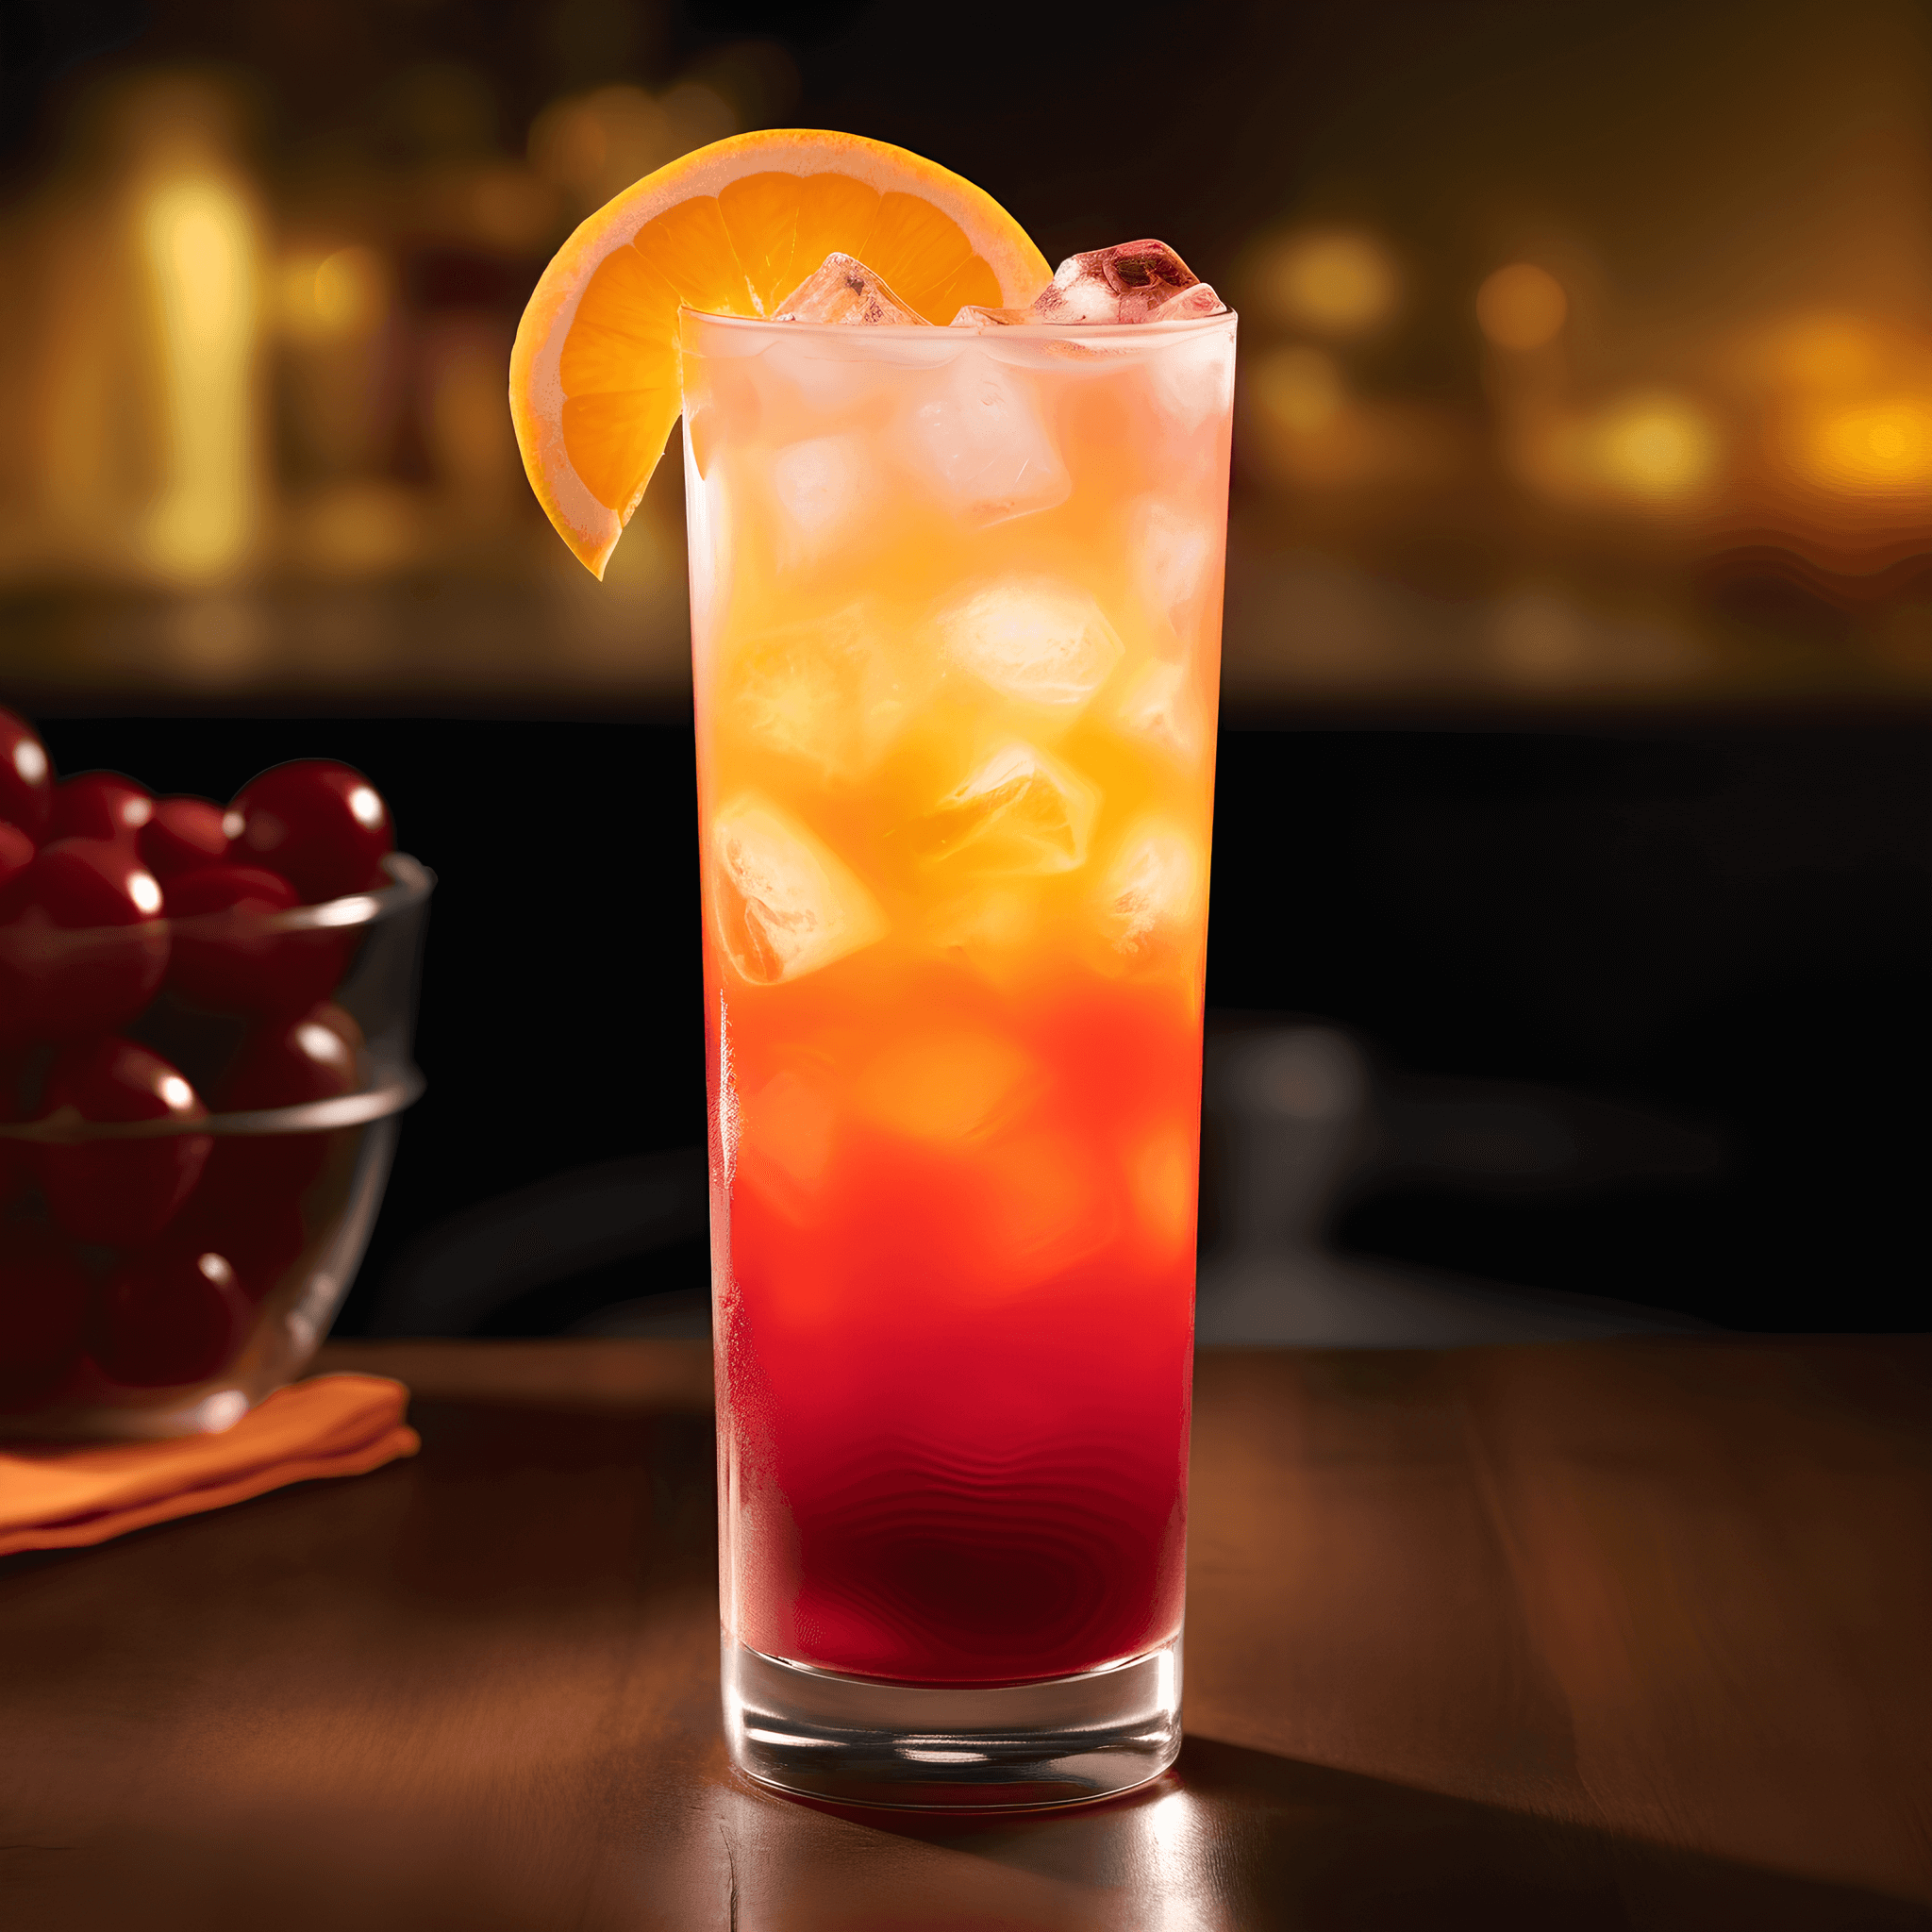 Tequila Sunrise Cocktail Recipe - The Tequila Sunrise has a sweet and fruity taste, with a hint of sourness from the orange juice and grenadine. The tequila adds a subtle warmth and depth to the flavor, making it a well-balanced and satisfying drink.